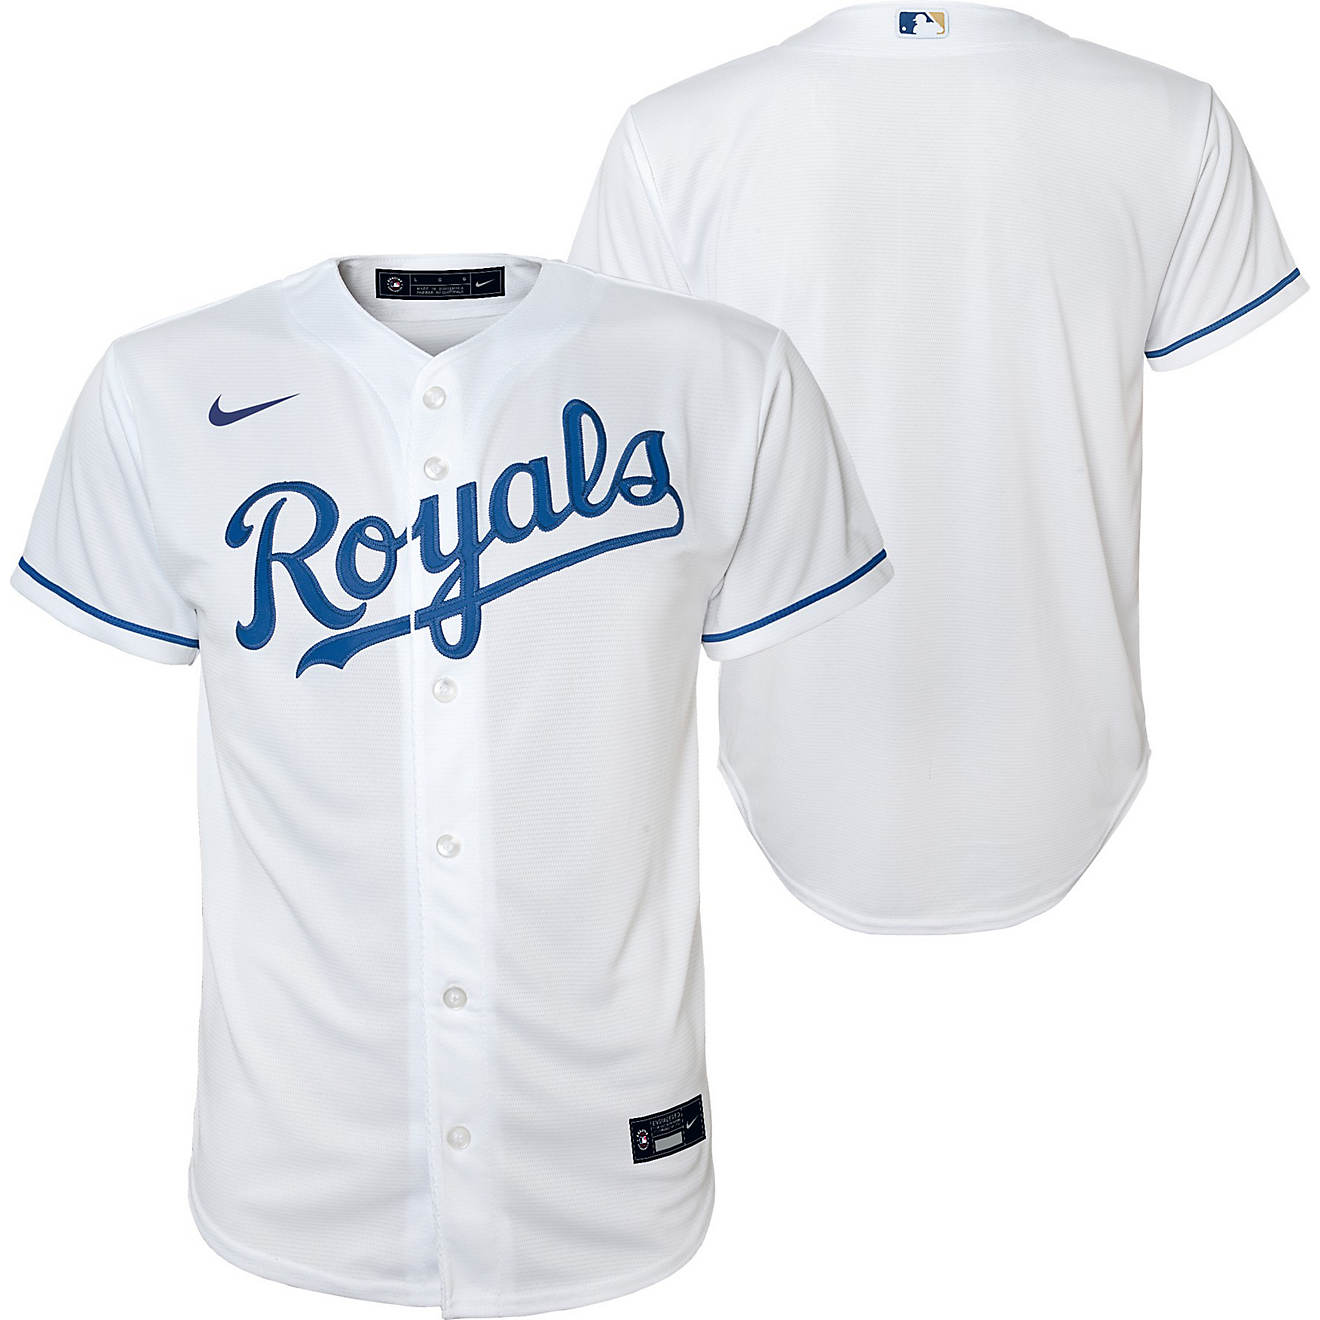 youth kc royals jersey